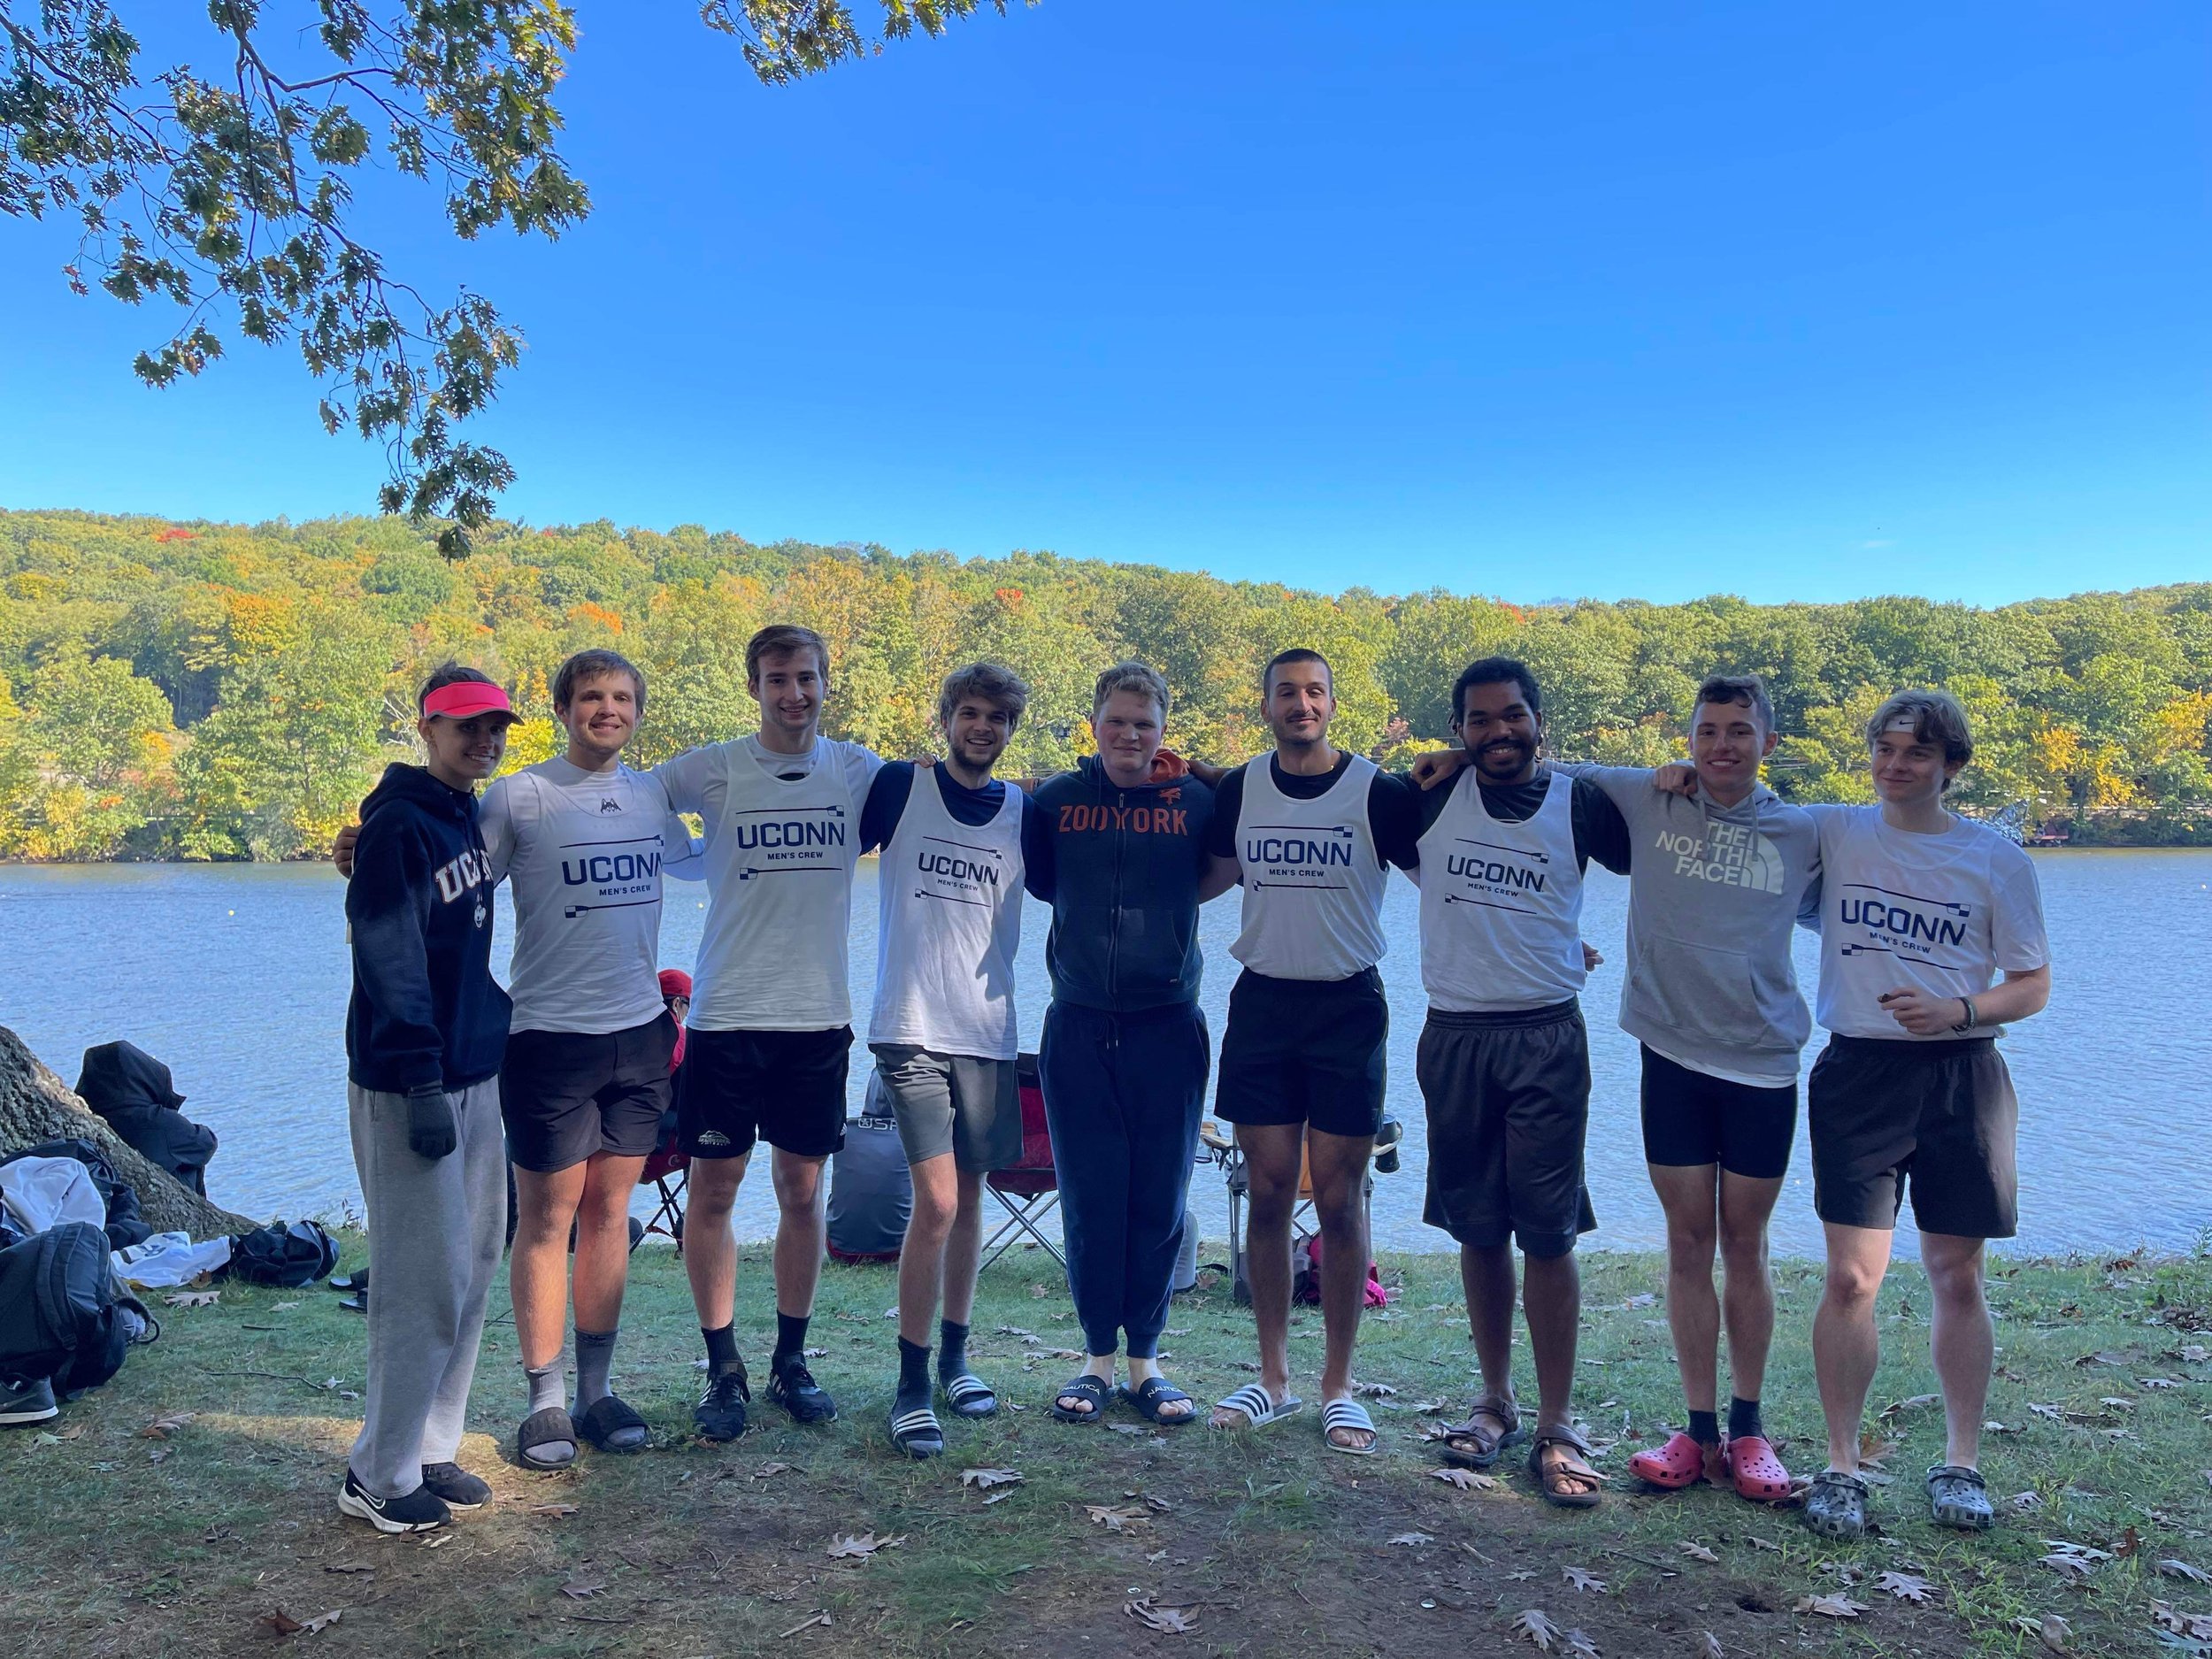 Collegiate Novice 8+ at Housatonic after their first race!